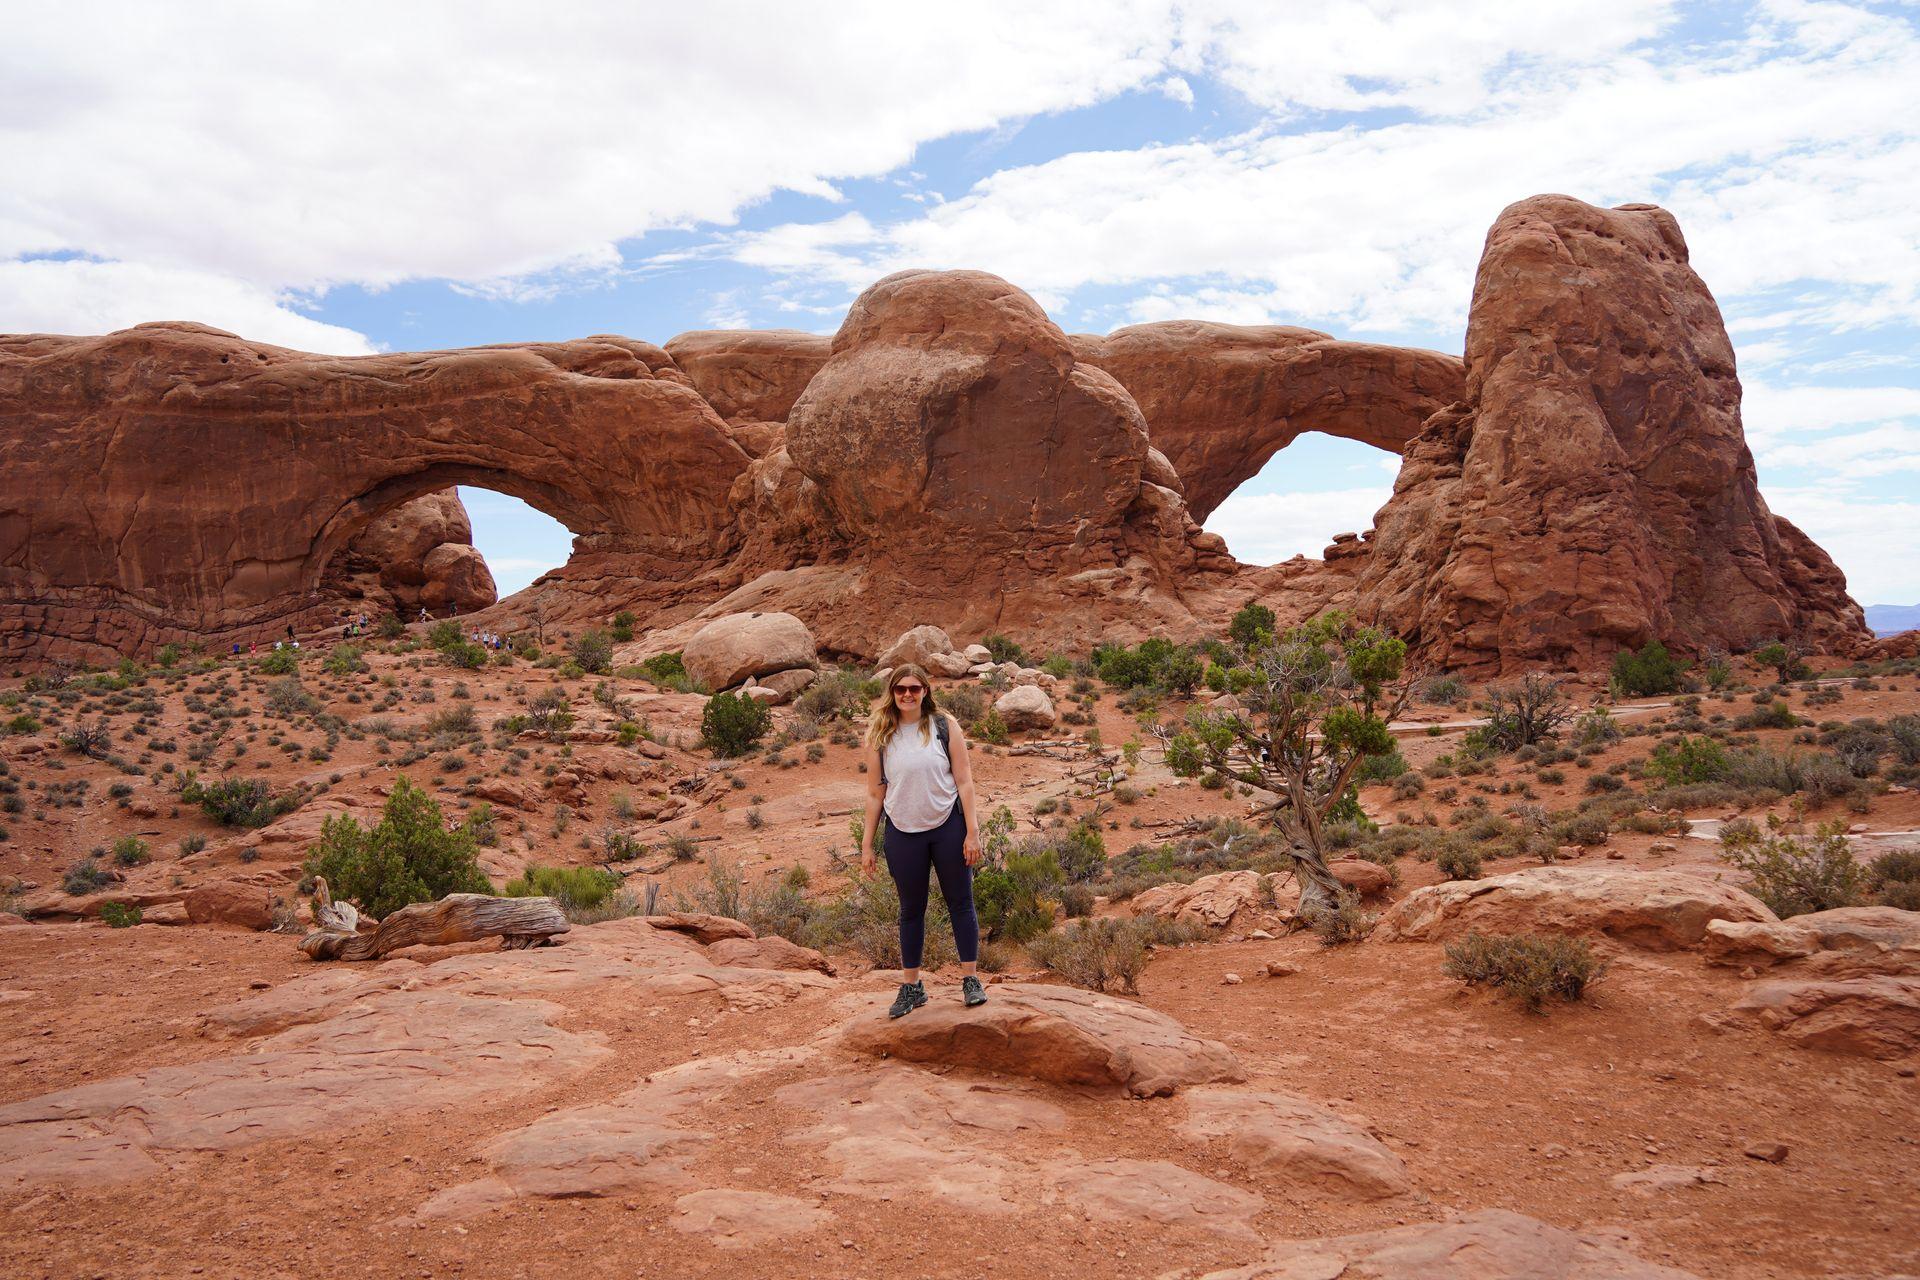 Lydia standing centered between the Windows, two giant arches that resemble the shape of eyes.